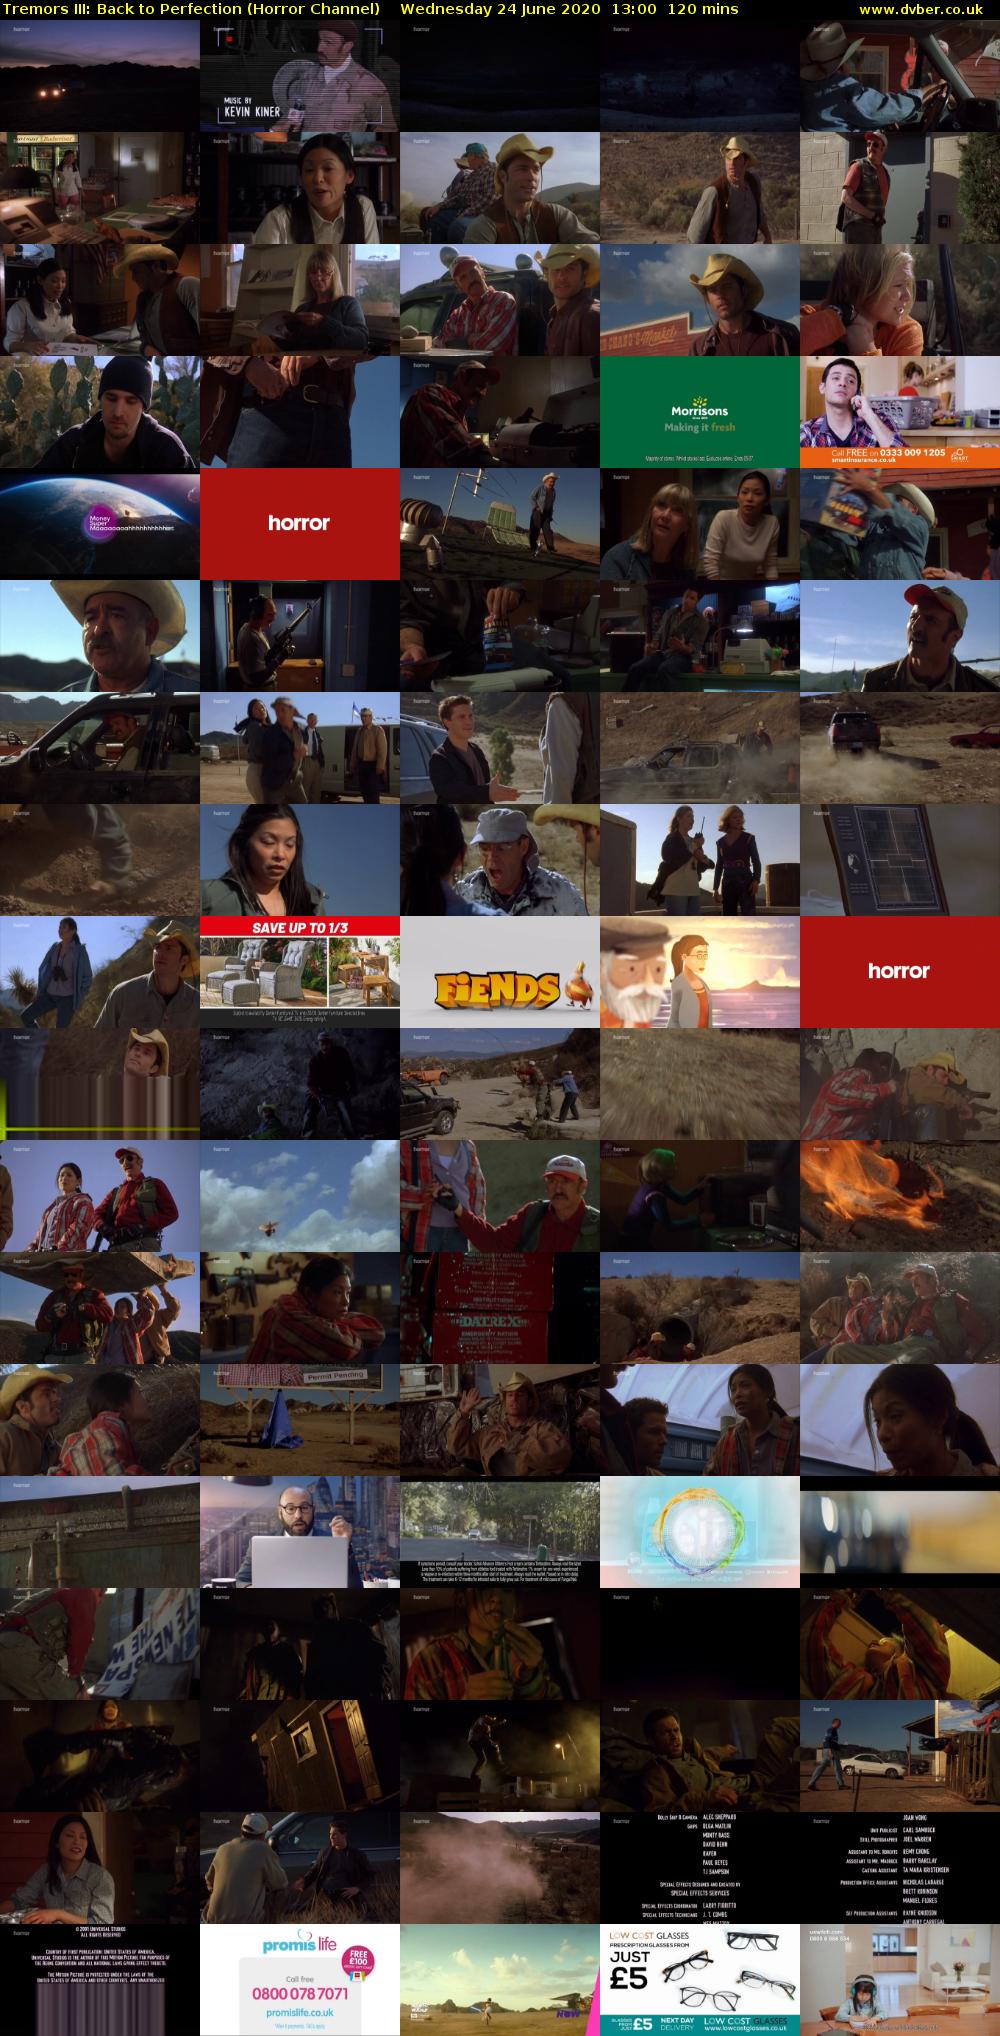 Tremors III: Back to Perfection (Horror Channel) Wednesday 24 June 2020 13:00 - 15:00